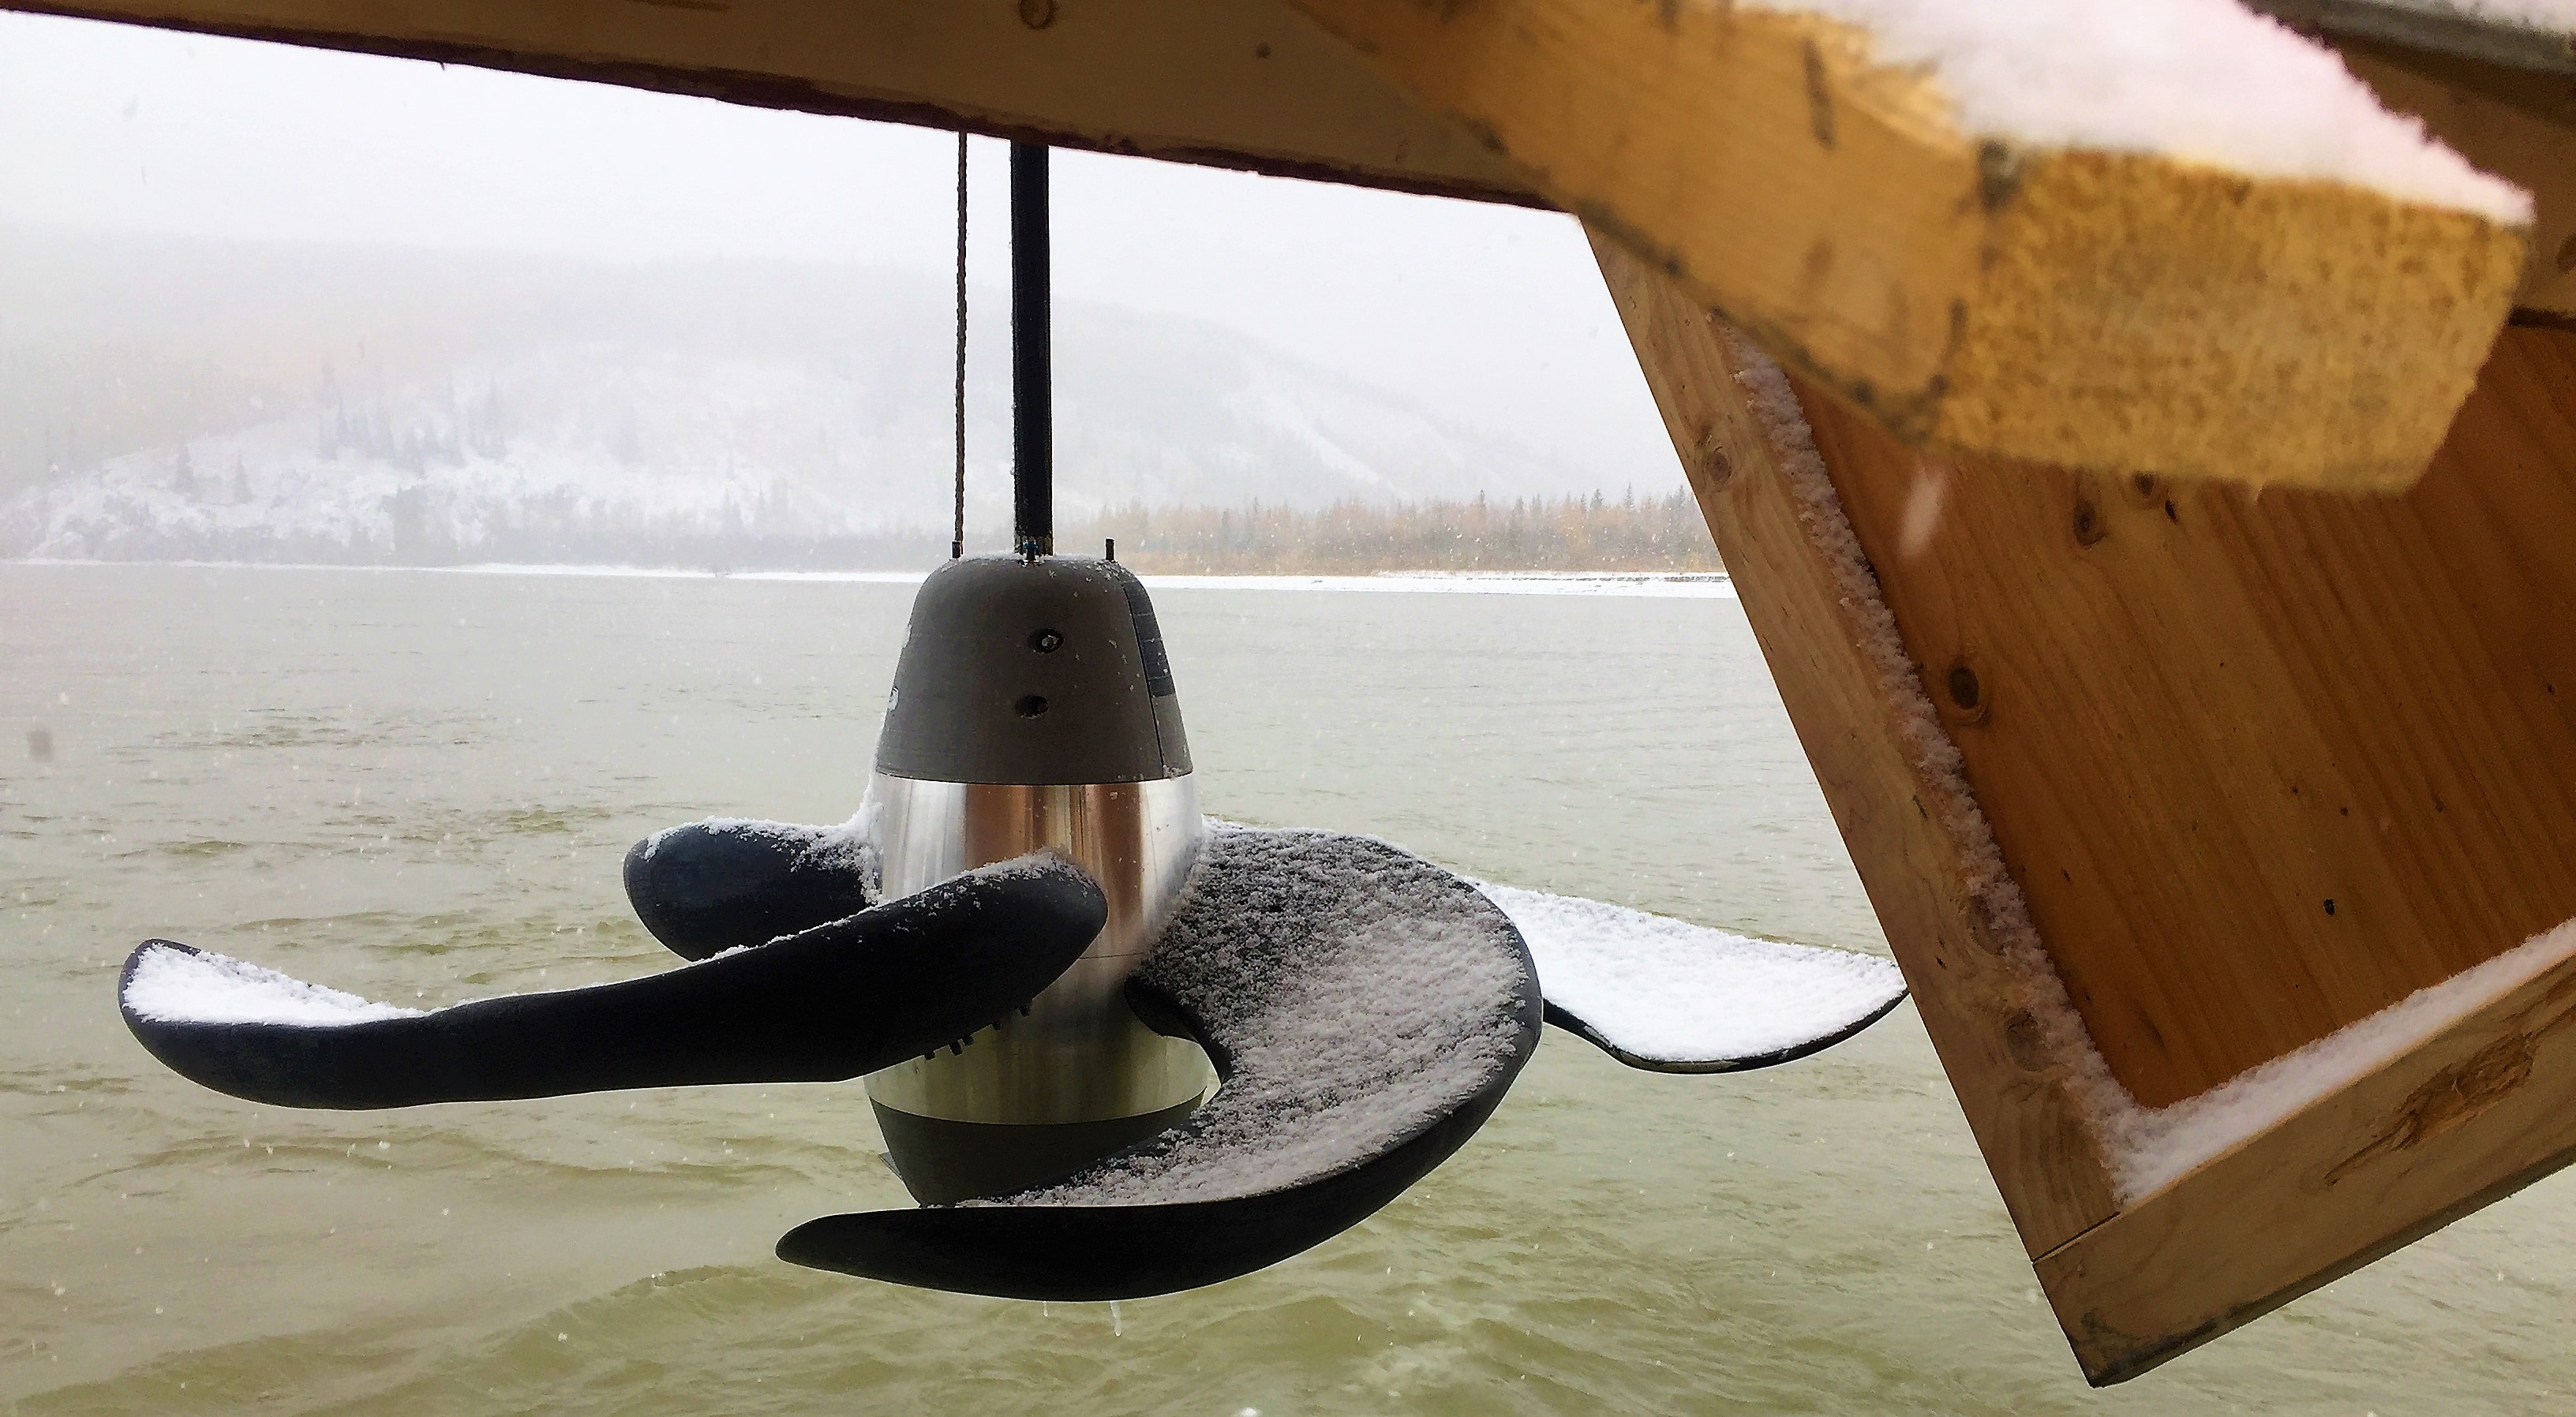 The BladeRunner turbine protoype hangs above the Tanana River from a test barge at the Tanana River Test Site near Nenana.